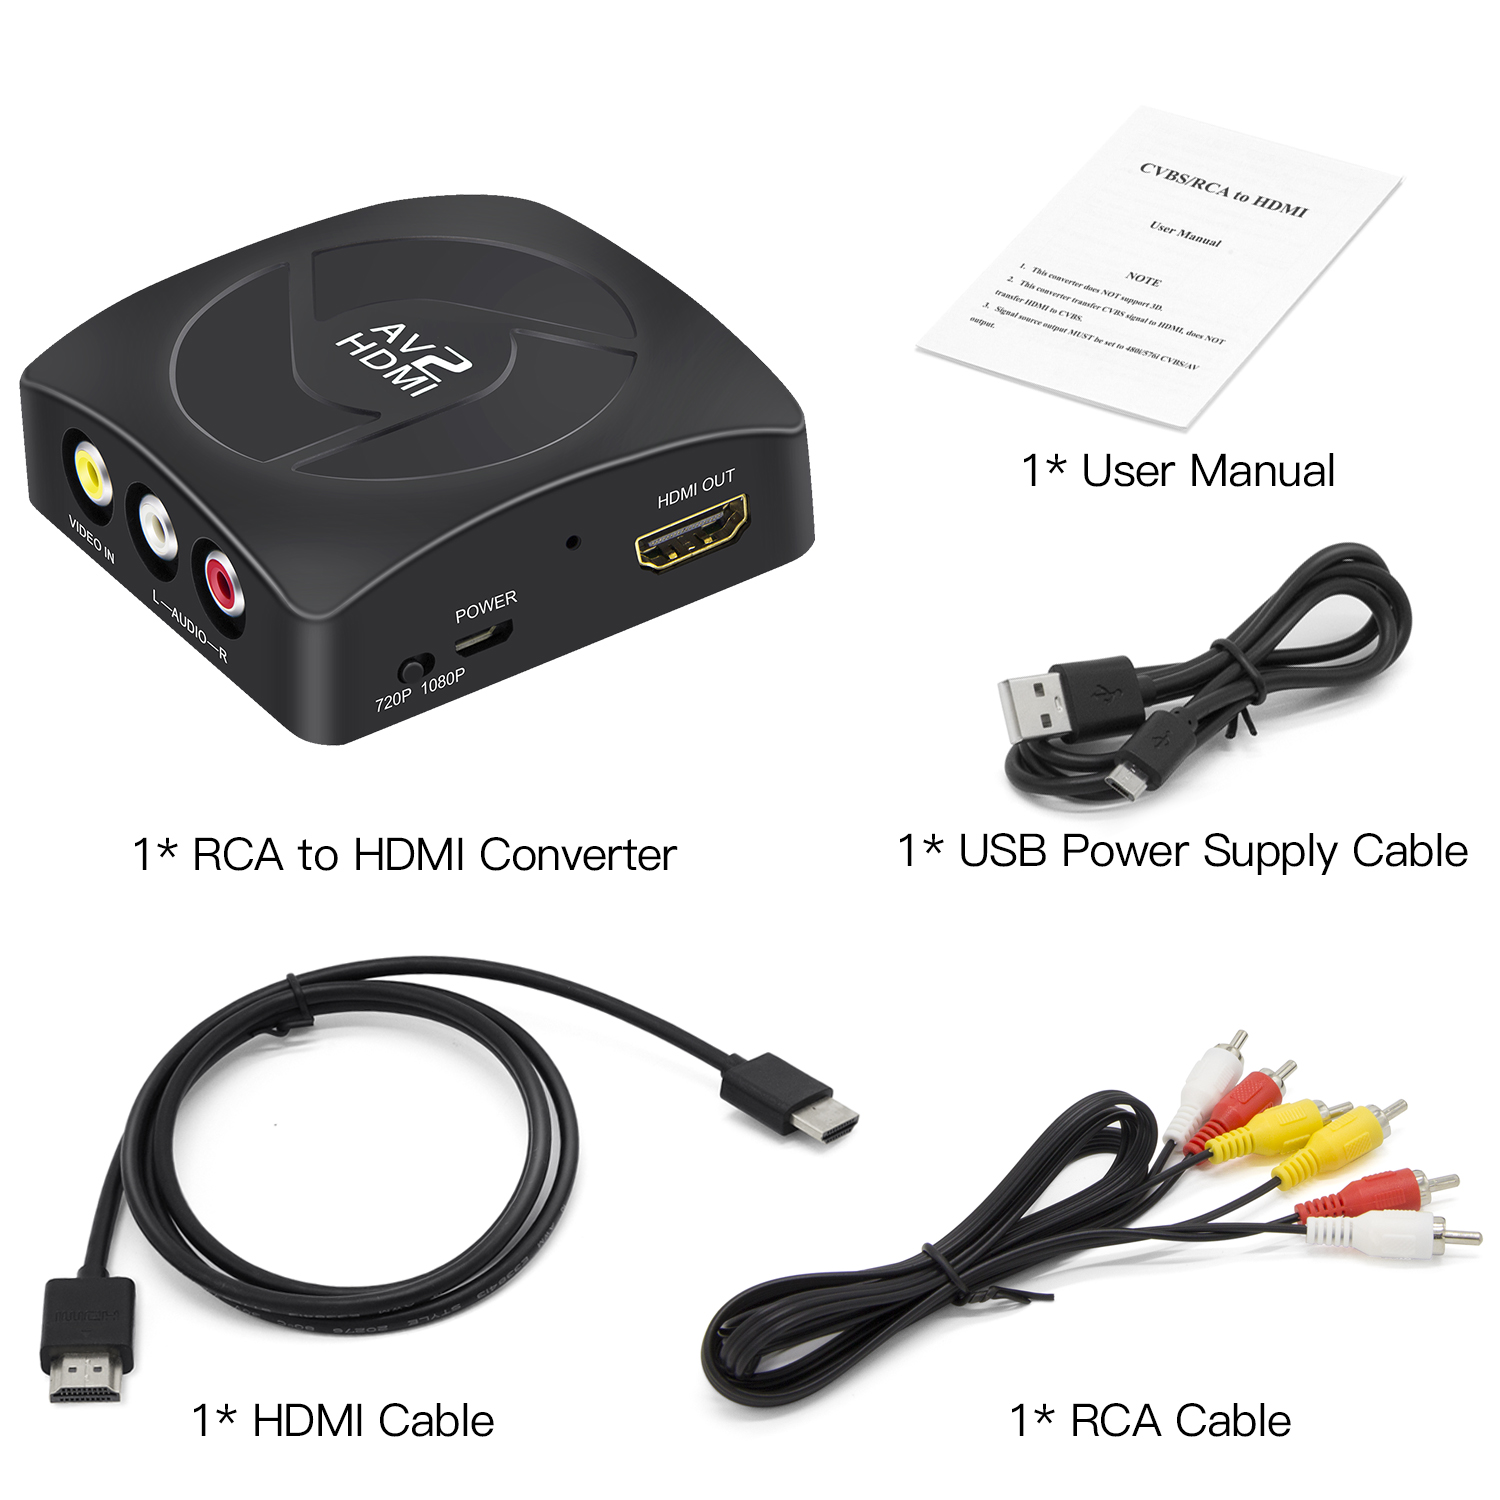 RCA to HDMI Converter, CVBS Composite AV to HDMI Converter, AV2HDMI Converter for PS2, N64, Wii, STB, VHS, VCR Camera, DVD(Includes HDMI and RCA cables) - image 3 of 6